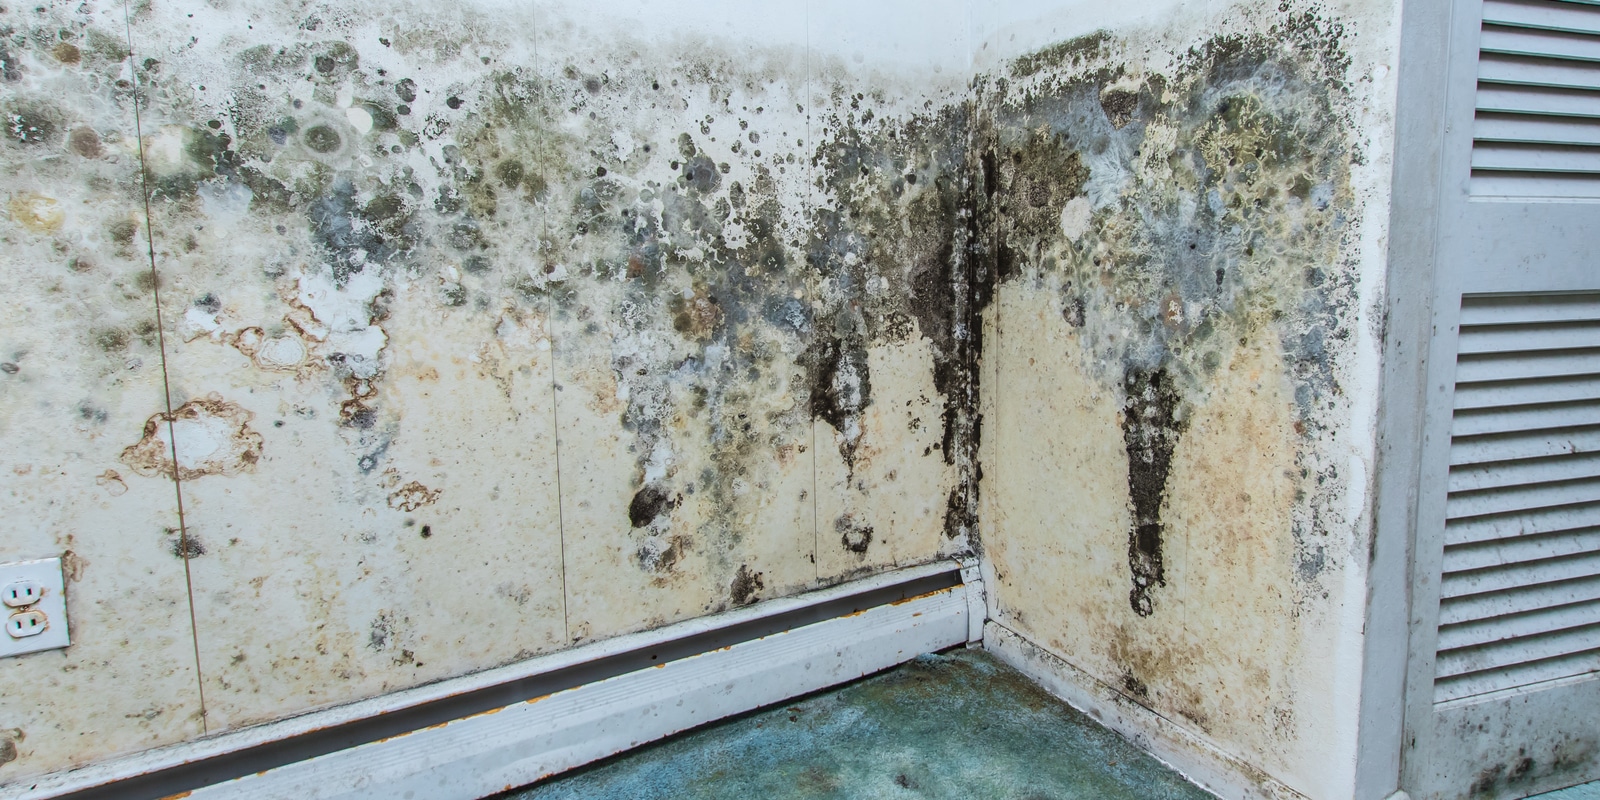 can my walls grow mold after water damage